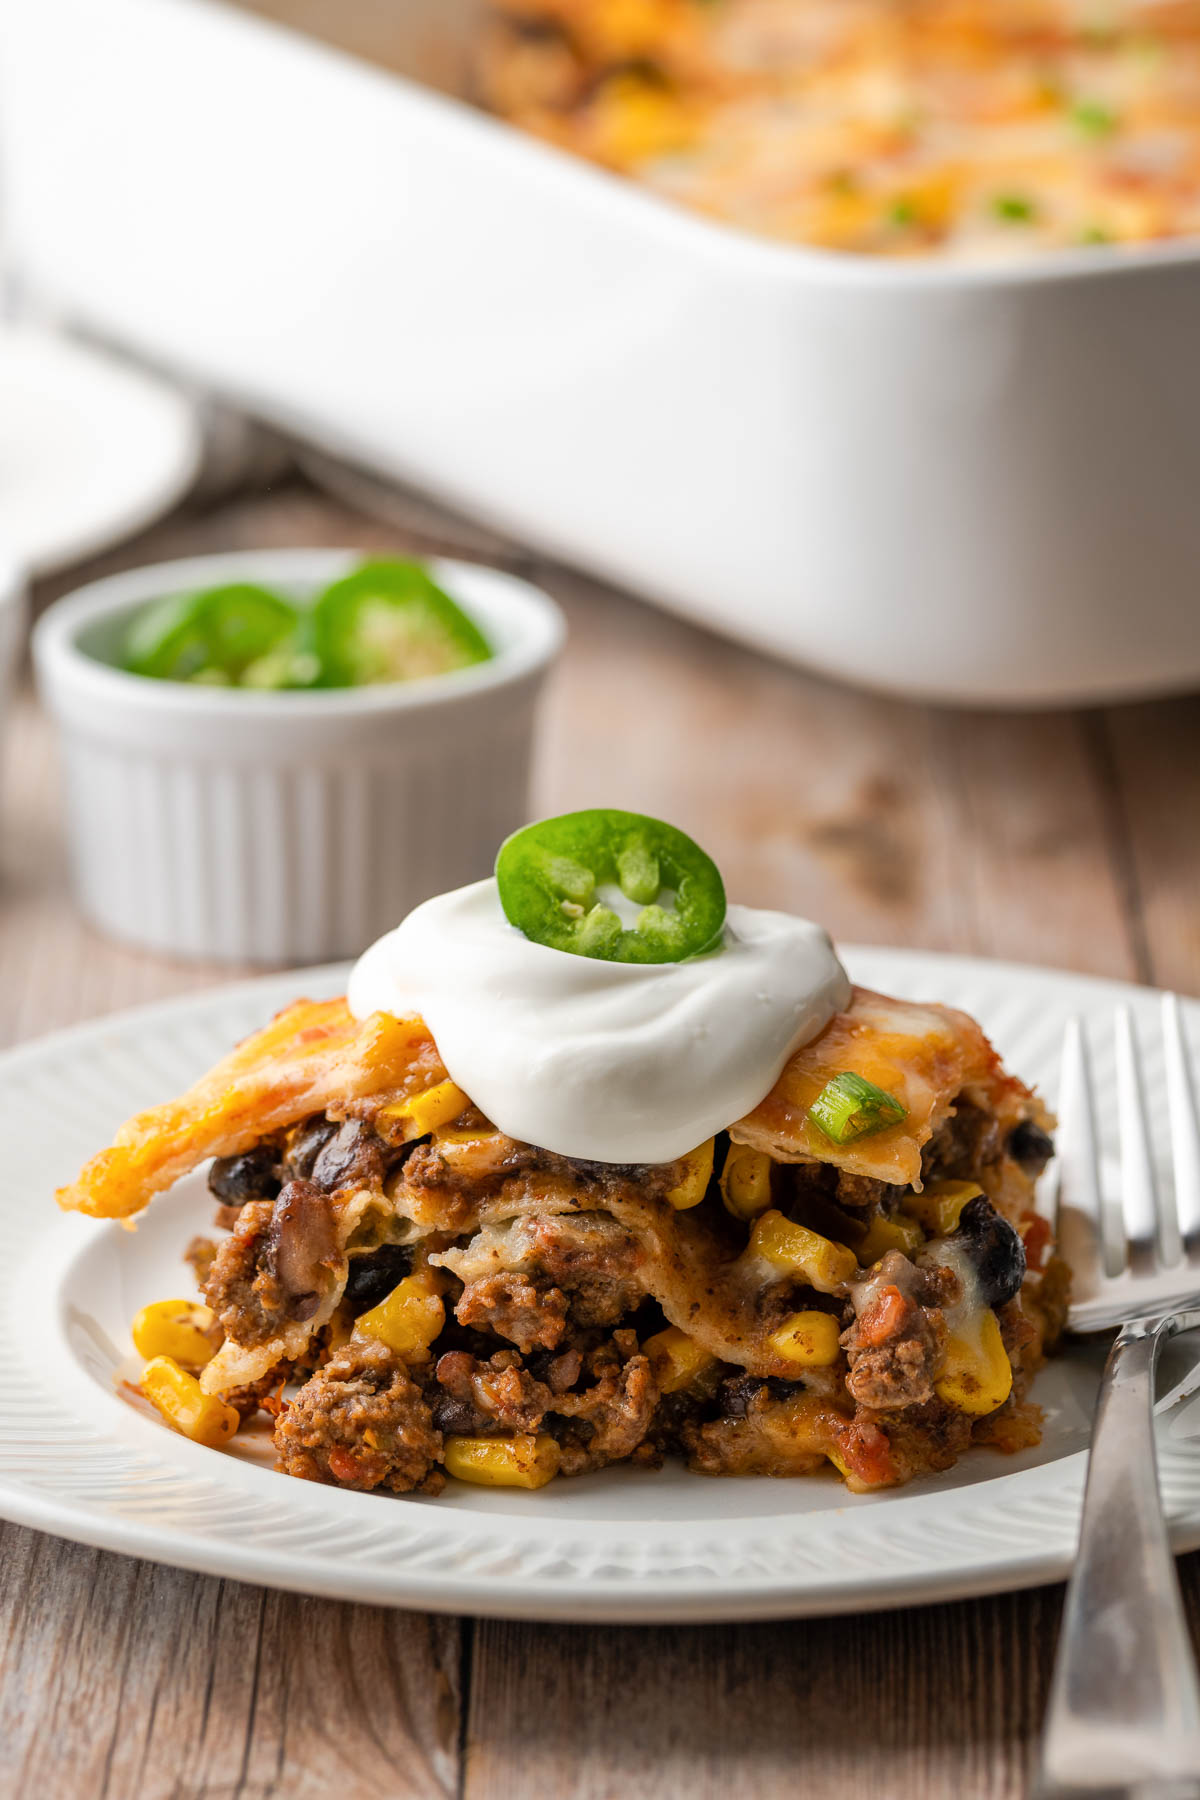 Taco lasagna shown on a white plate topped with sour cream and a slice of jalapeno.